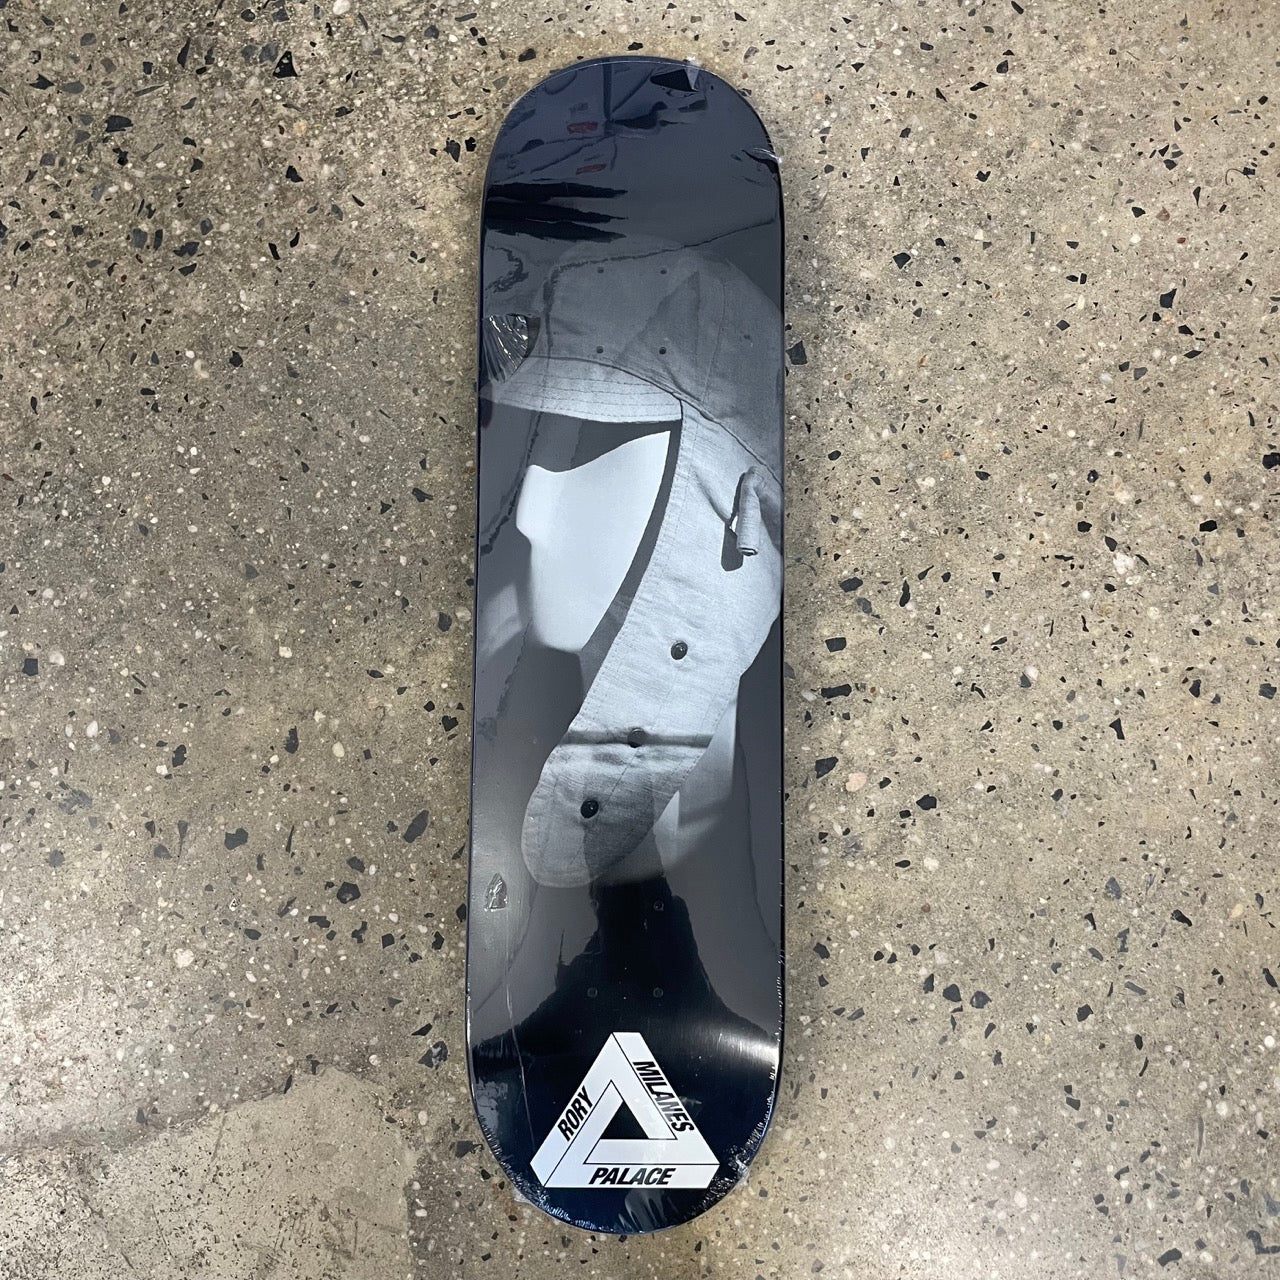 white mannequin head with hat on black skate deck